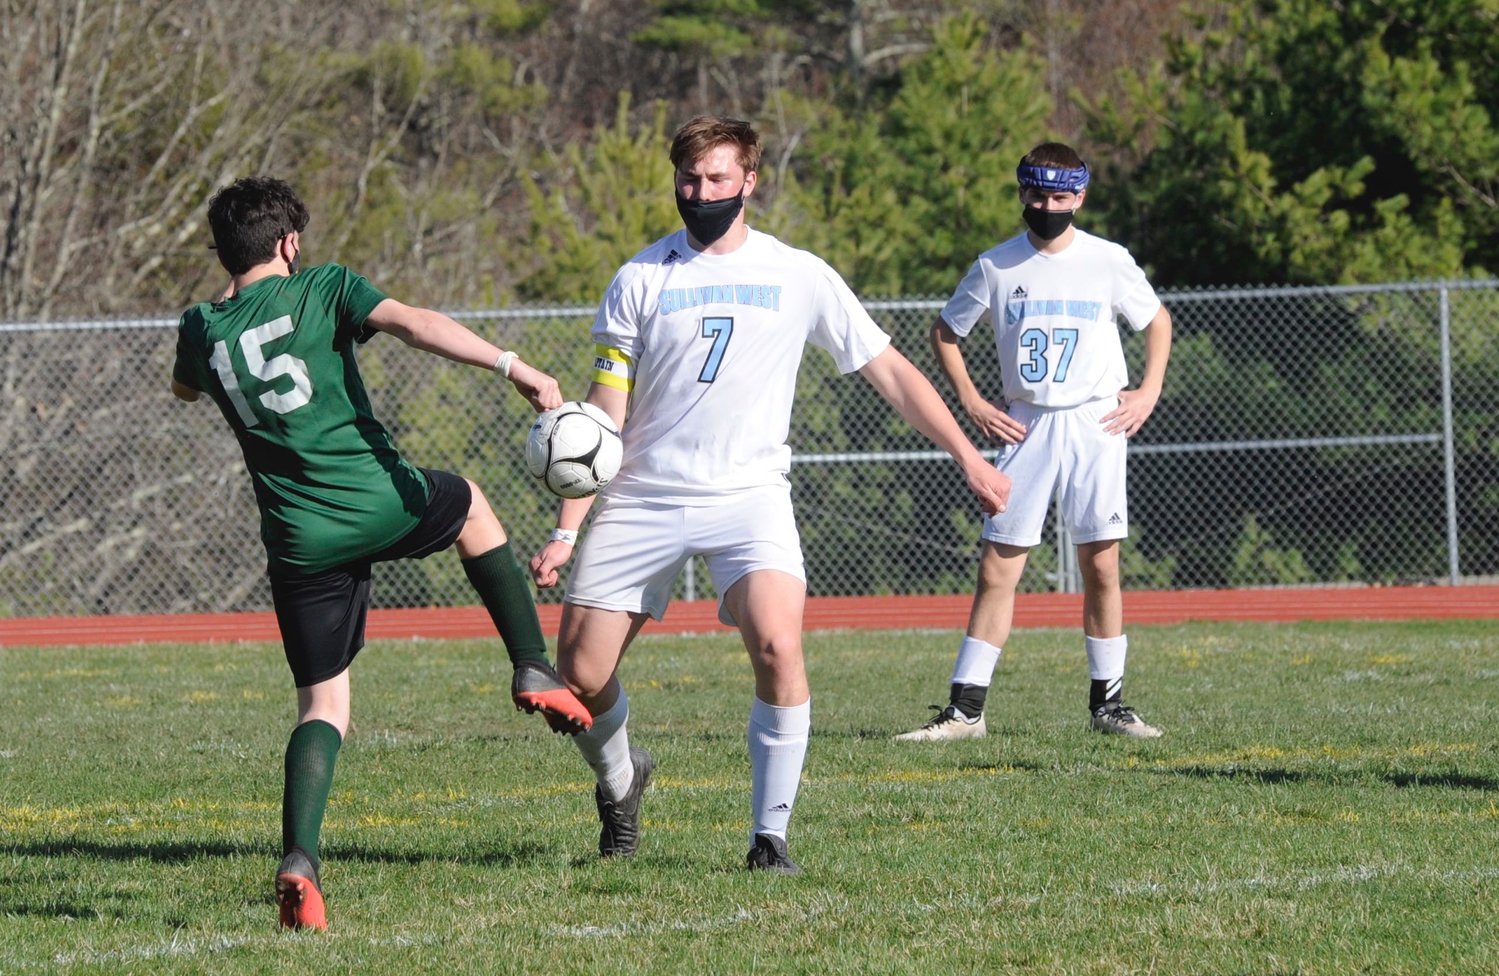 Dueling booters. Eldred’s Sean Whalan and Sullivan West’s Ryan Mace, who later scored the Bulldogs winning goal in the second frame. Pictured in the background is Sullivan West’s Michael Schroeder.